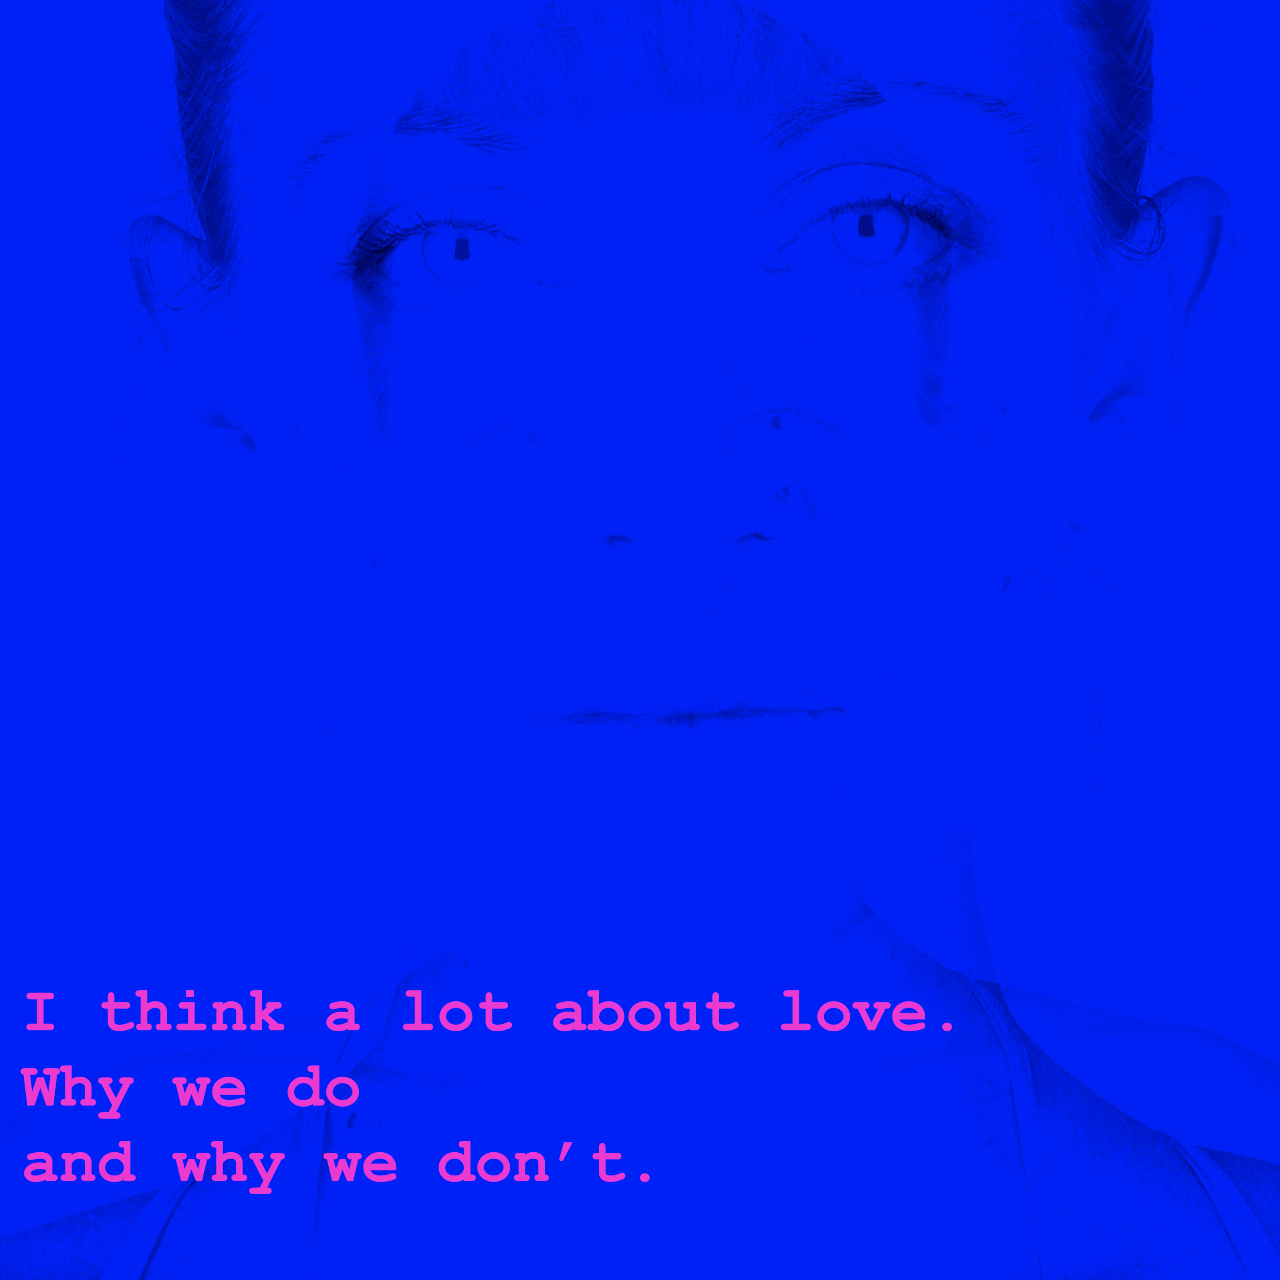 High-contrast portrait of Tiffany Danielle Elliott on a blue background, with the text "I think a lot about love / why we do / and wy we don't" superimposed in pink.